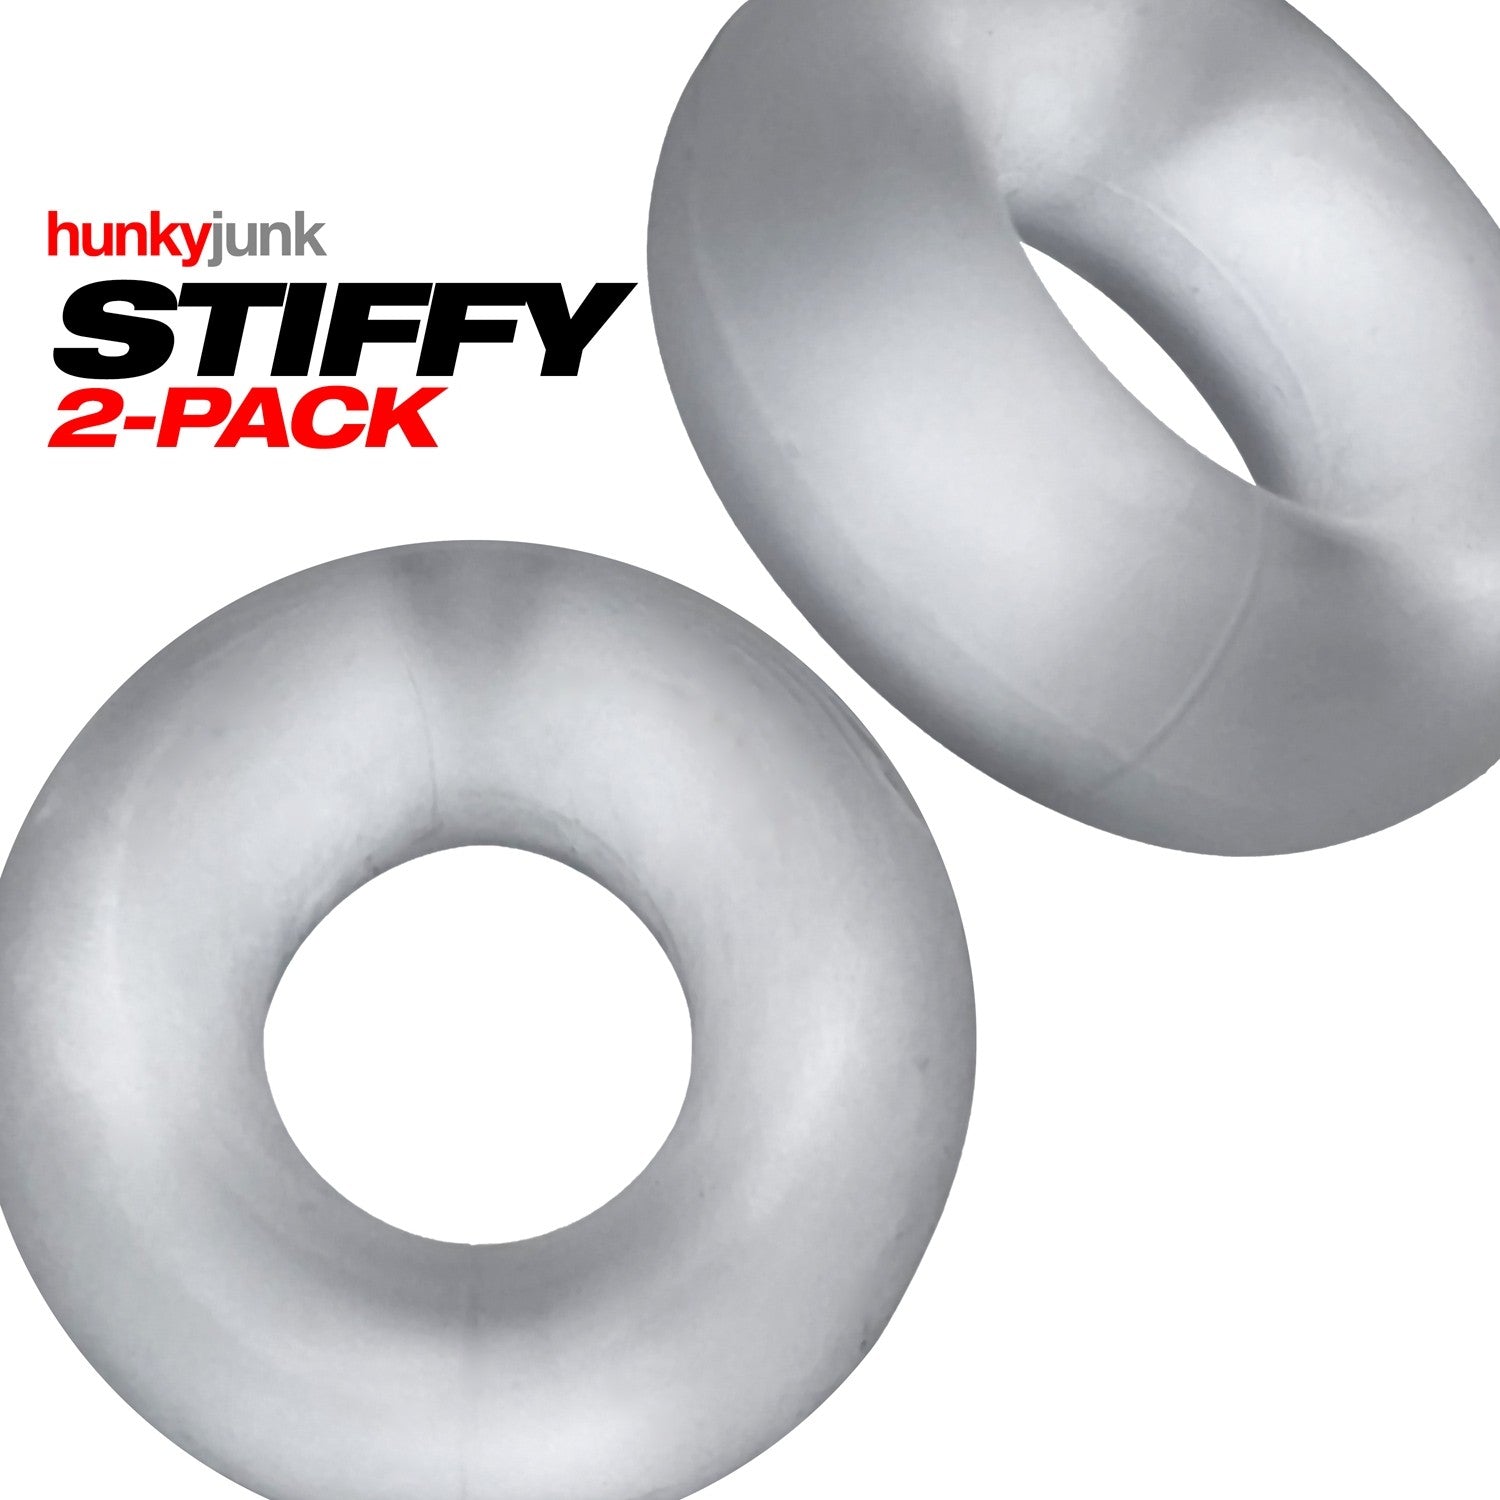 Hunkyjunk Stiffy Bulge Cock Ring Clear Ice 2 Pack - XOXTOYS